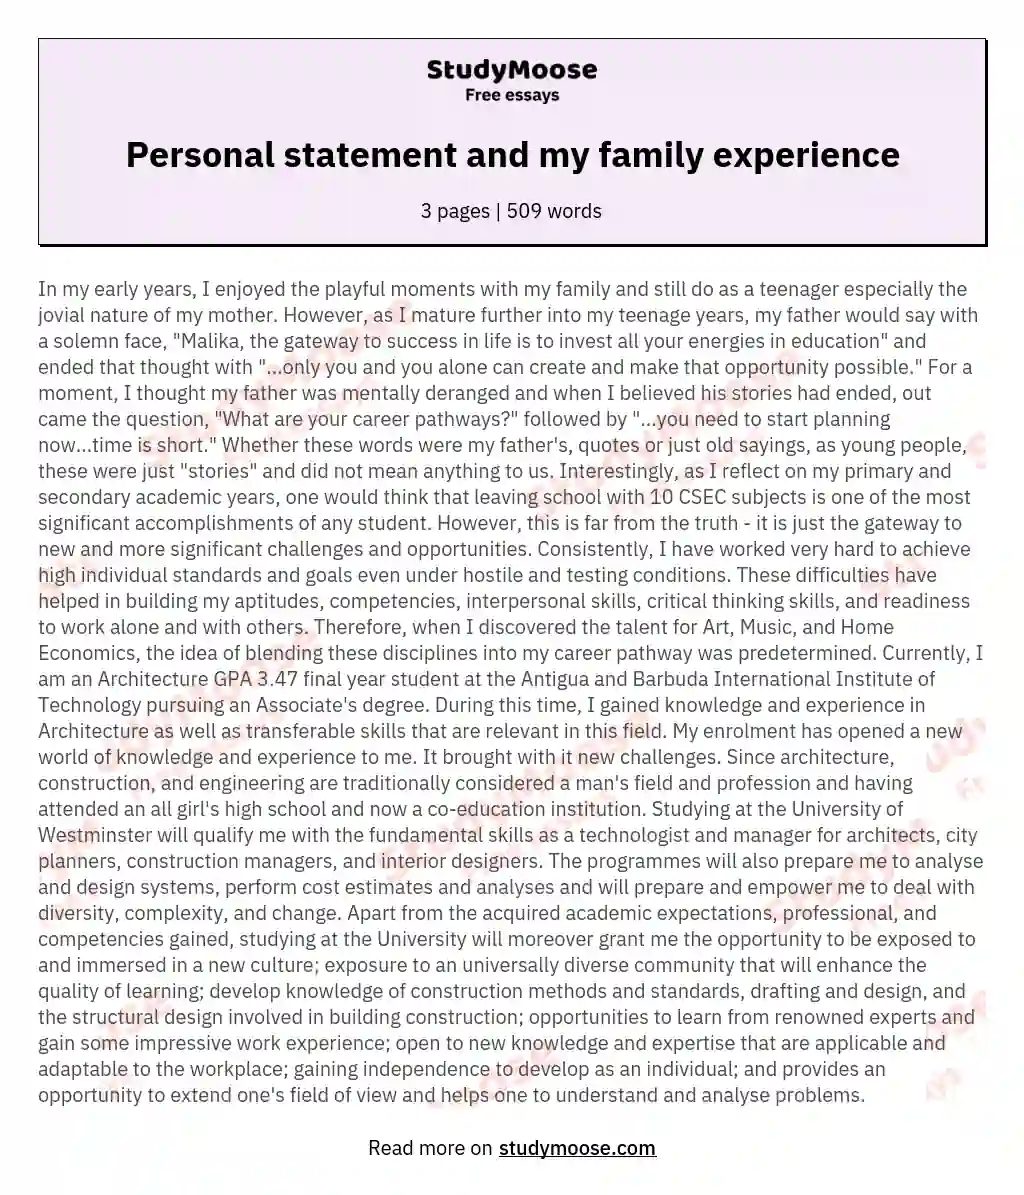 Personal statement and my family experience essay